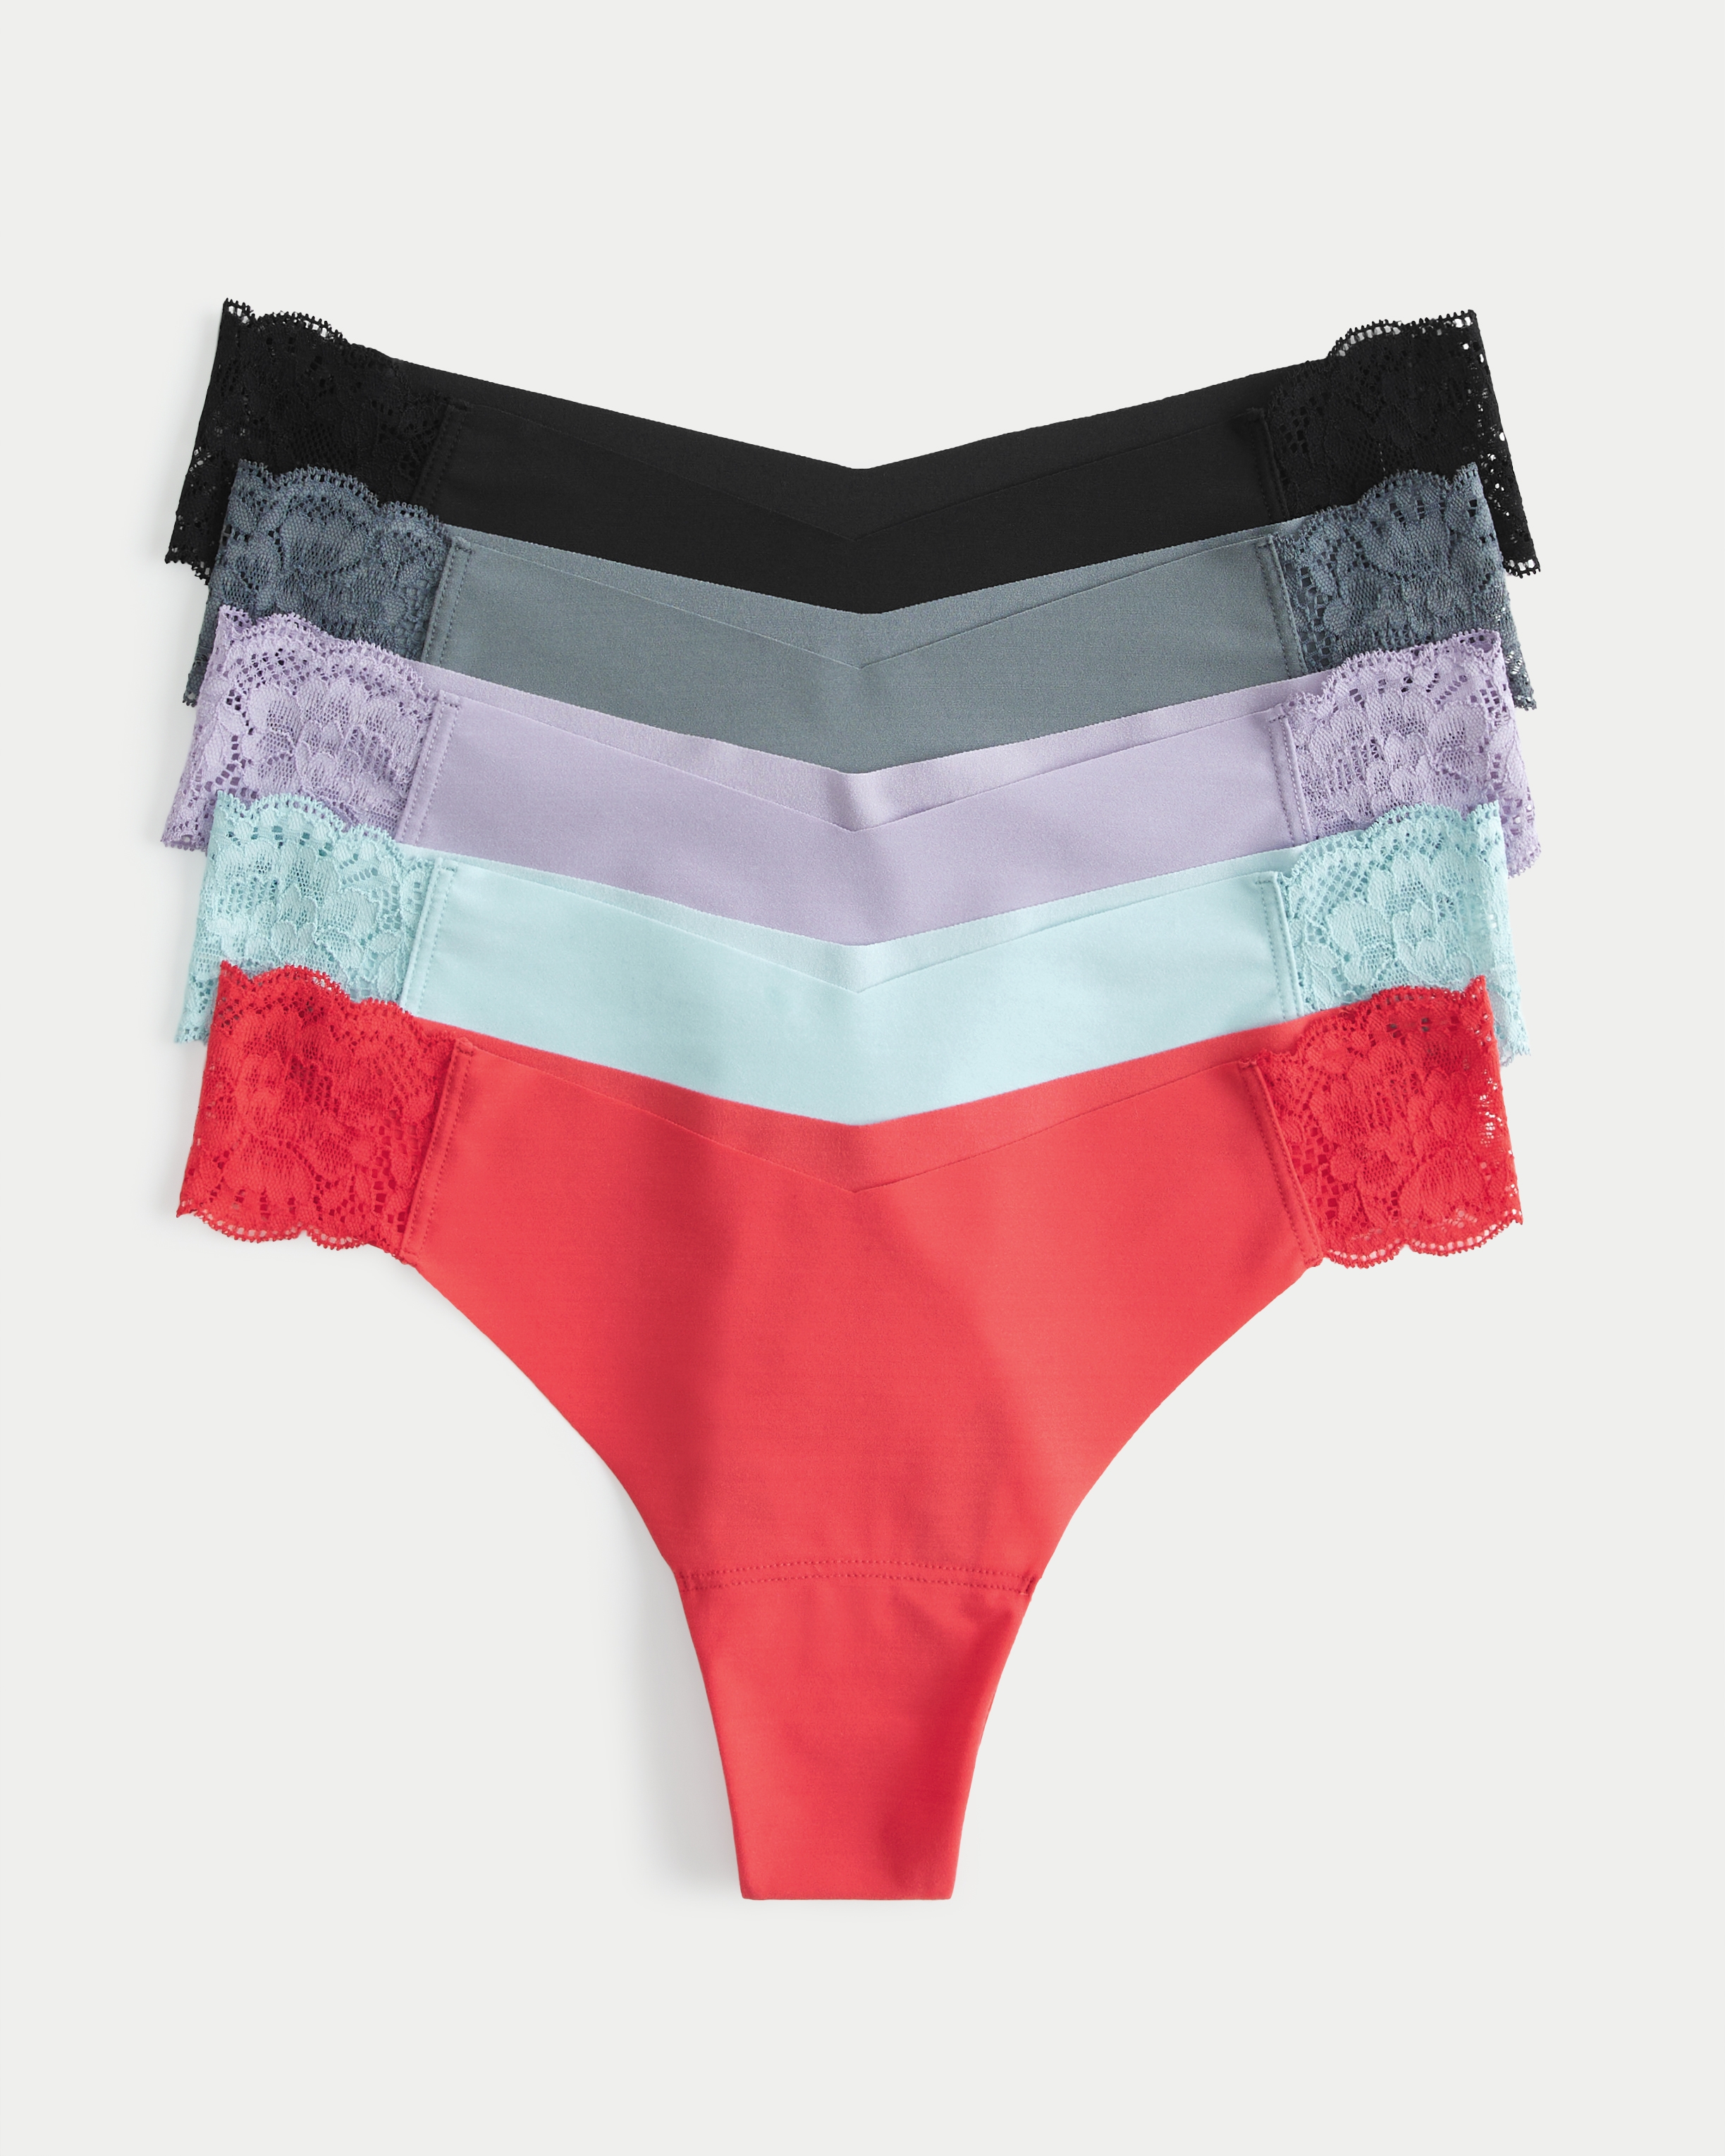 Hollister Gilly Hicks Lace-Side No-Show Thong Underwear 5-Pack